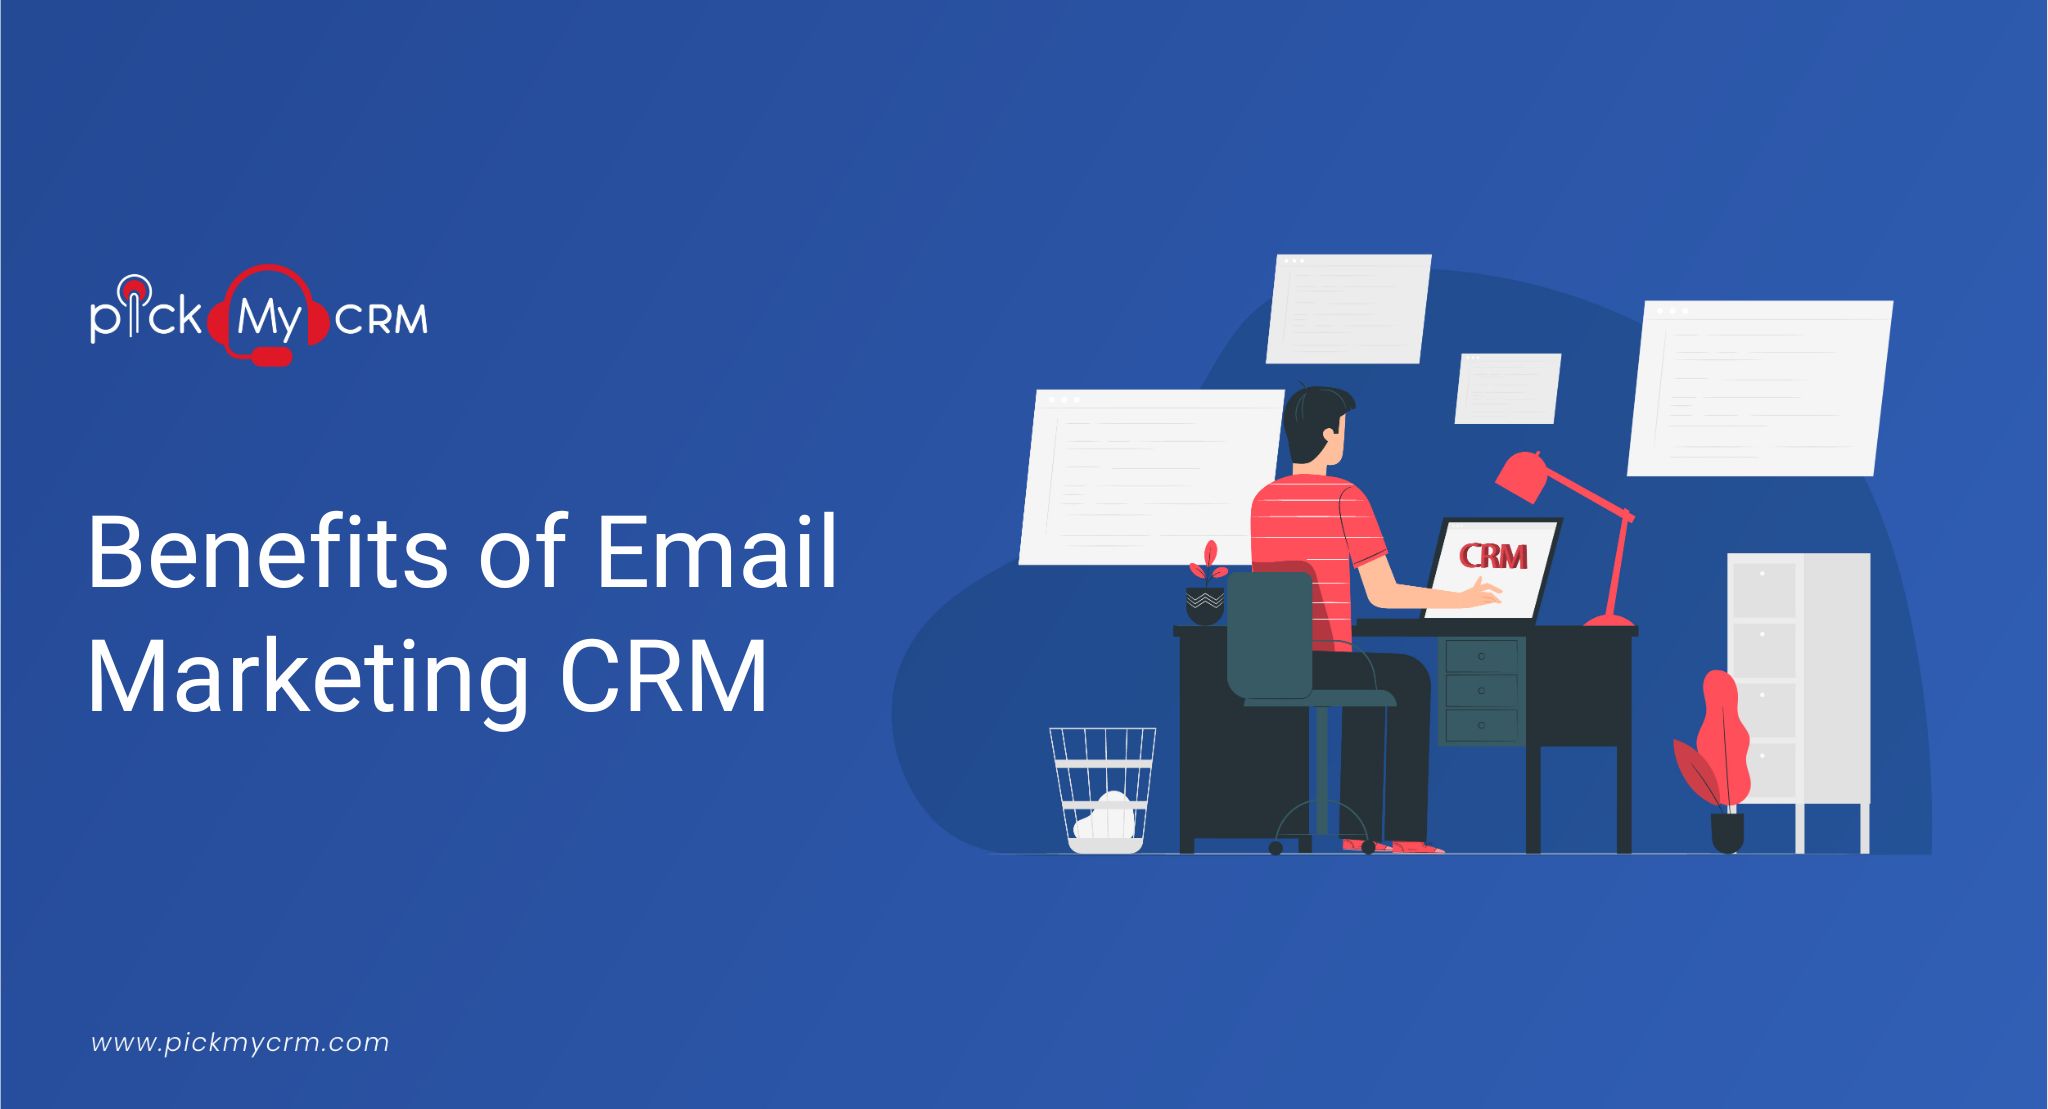 Benefits of Email Marketing CRM